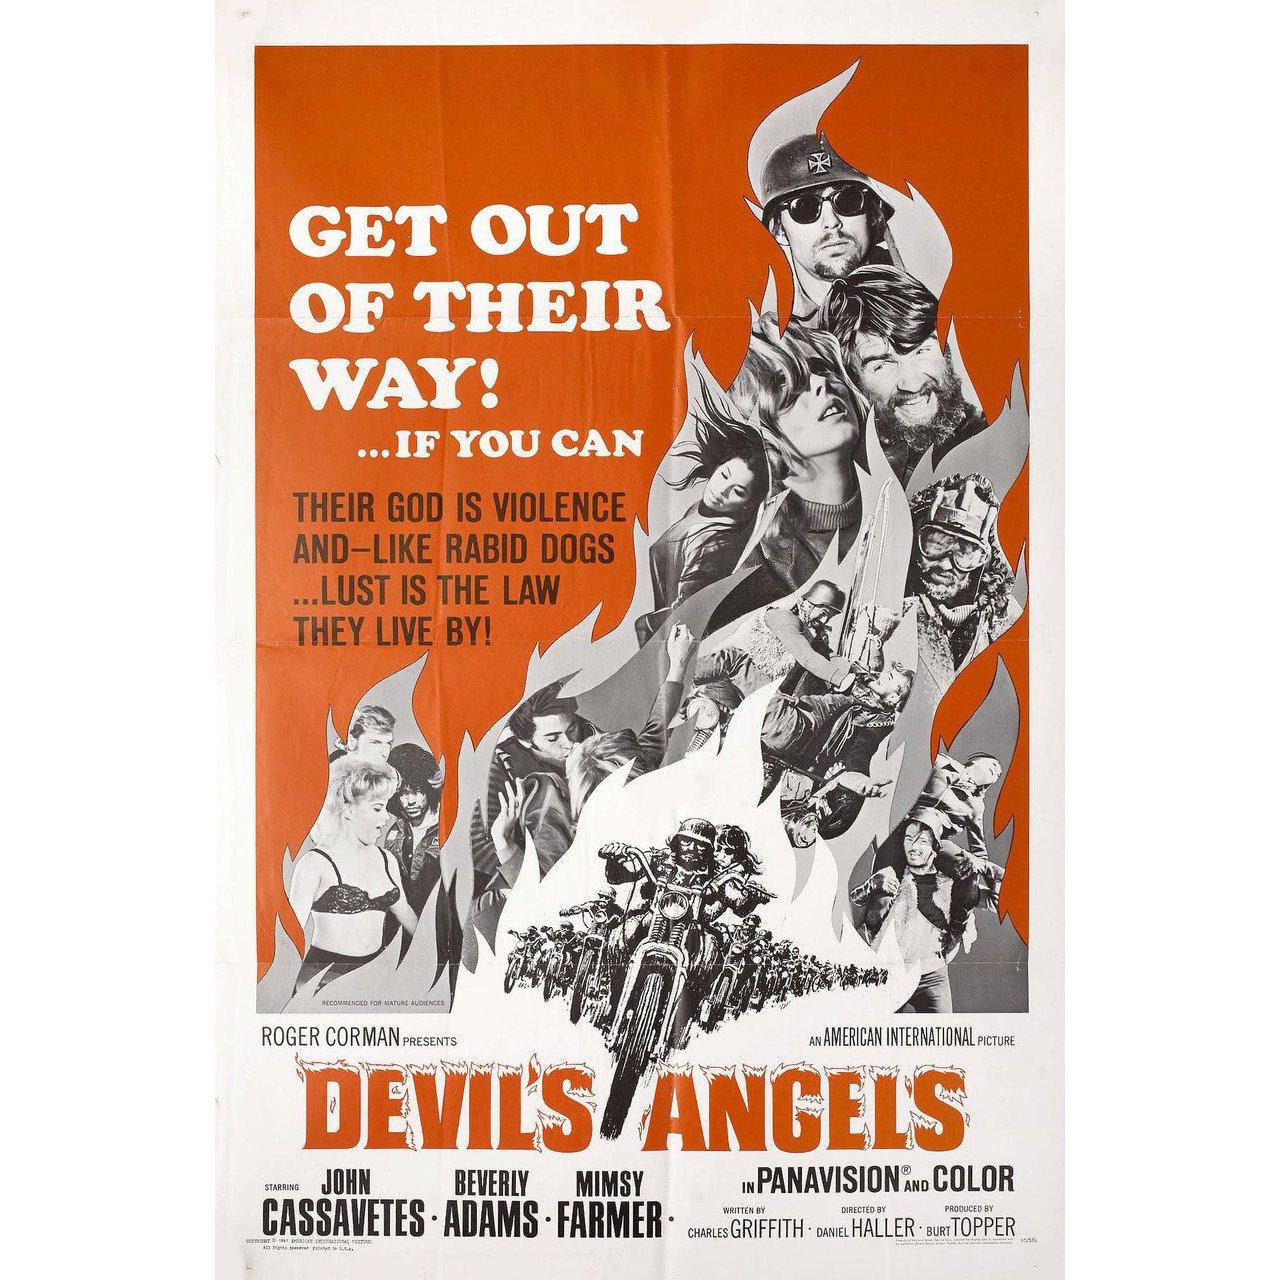 Original 1967 U.S. one sheet poster for the film Devil's Angels directed by Daniel Haller with John Cassavetes / Beverly Adams / Mimsy Farmer / Maurice McEndree. Very good-fine condition, folded. Many original posters were issued folded or were